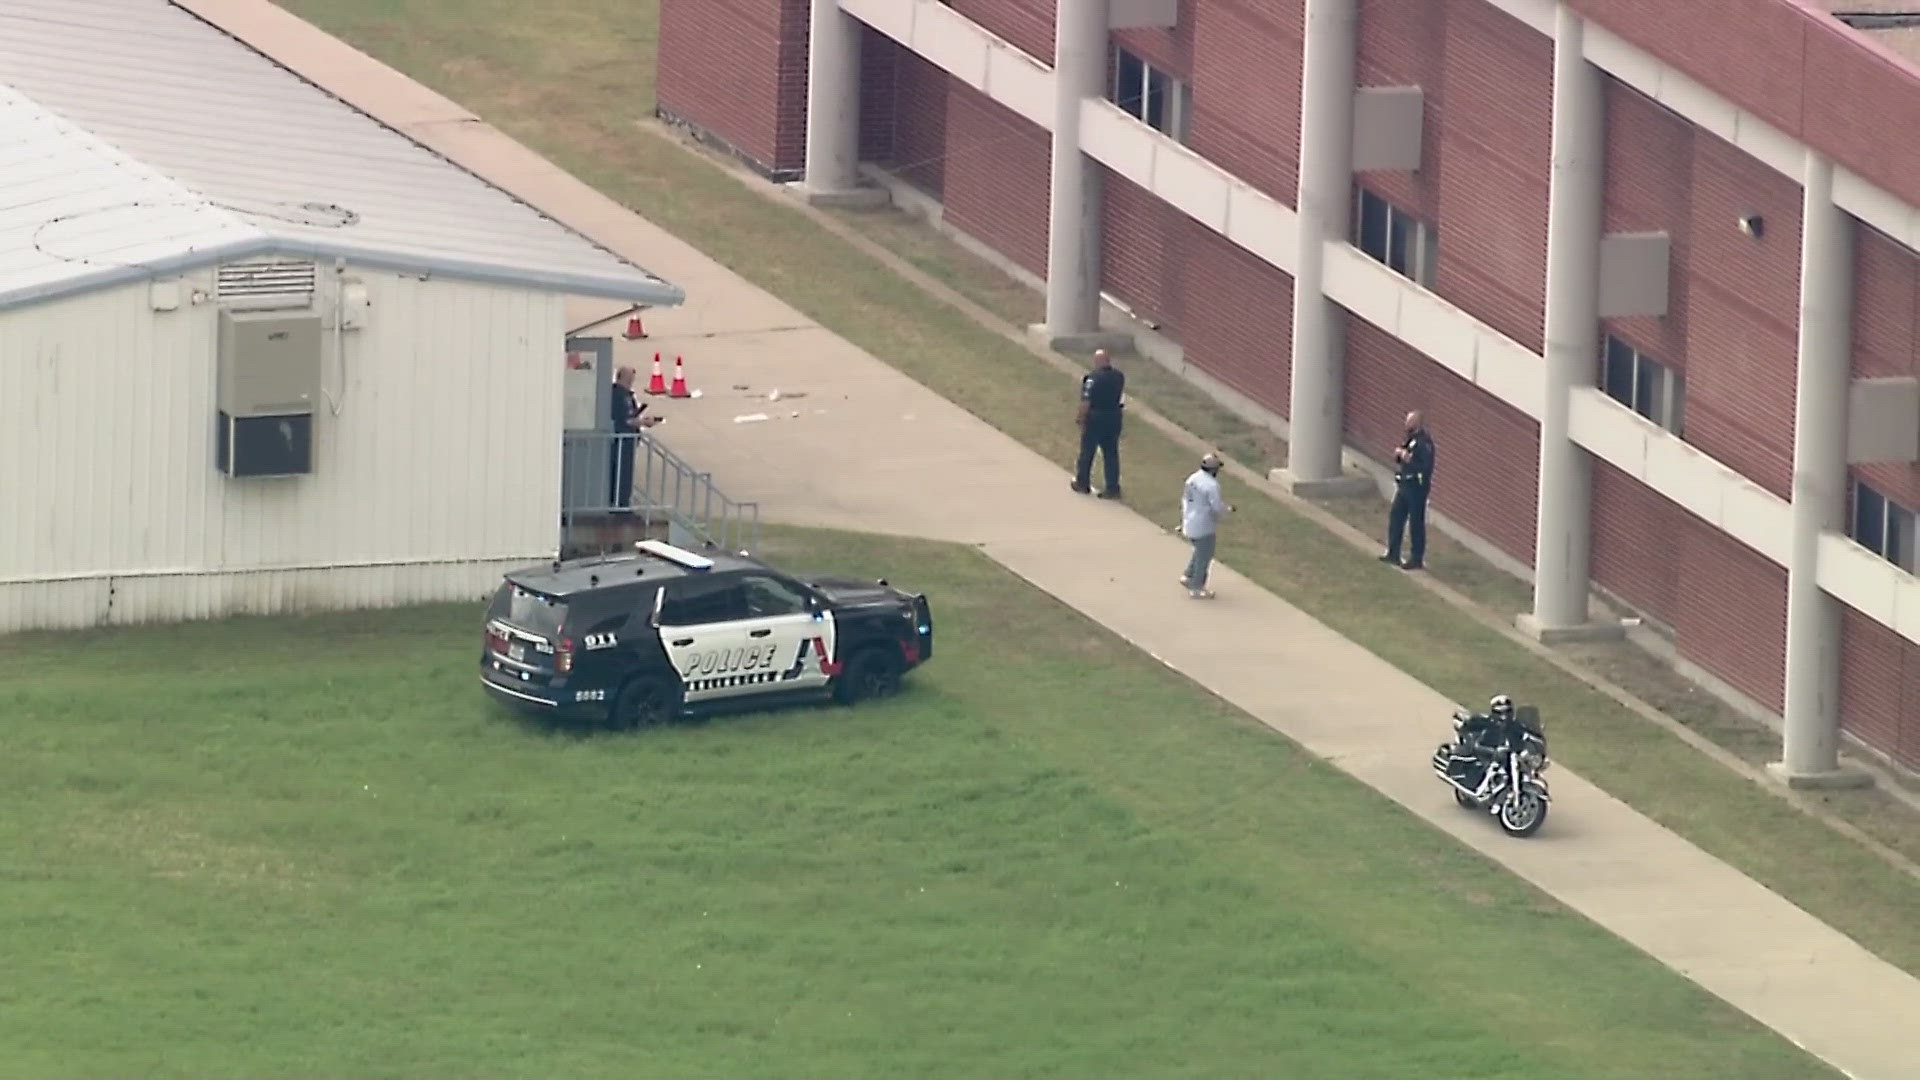 Bowie High School was on lockdown Wednesday afternoon due to an on-campus shooting outside of the school building.